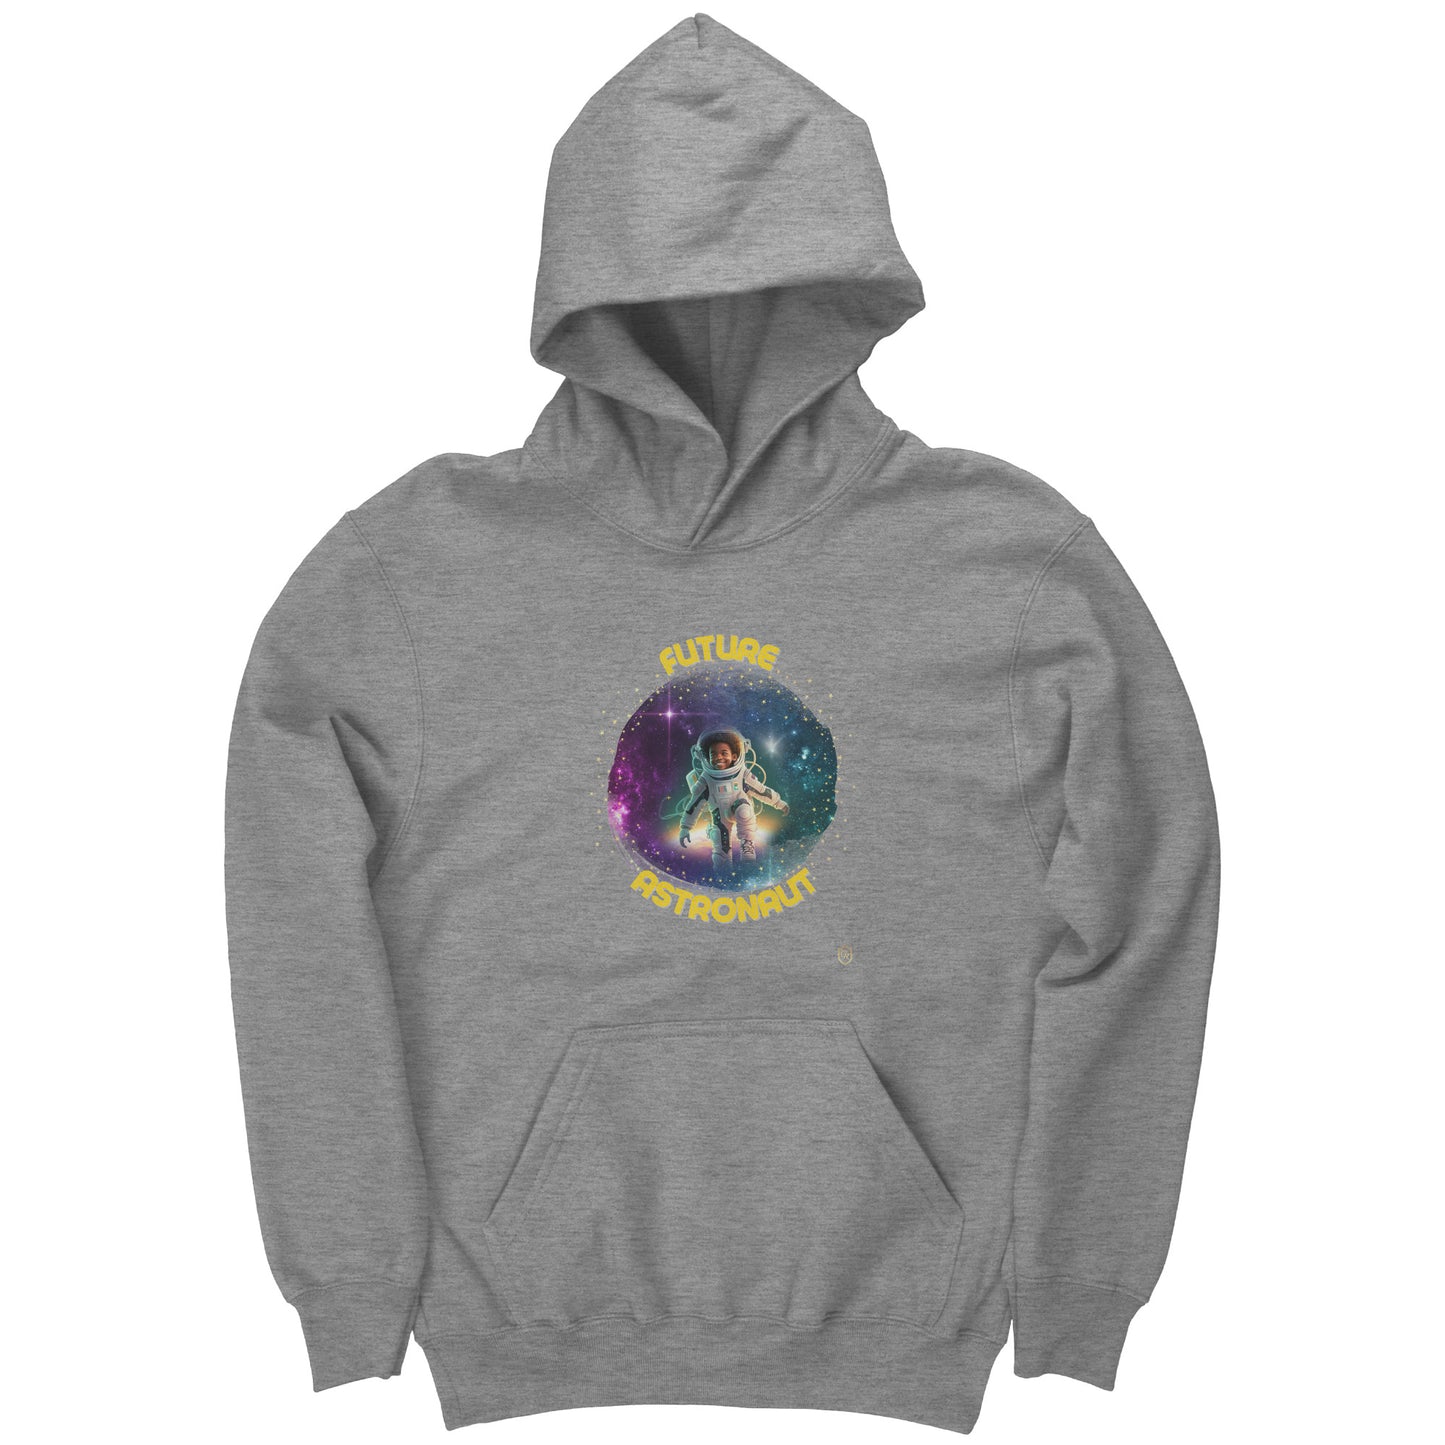 Young Boy's Galactic Explorer Hoodie: The Official Astronaut Gear of the Future